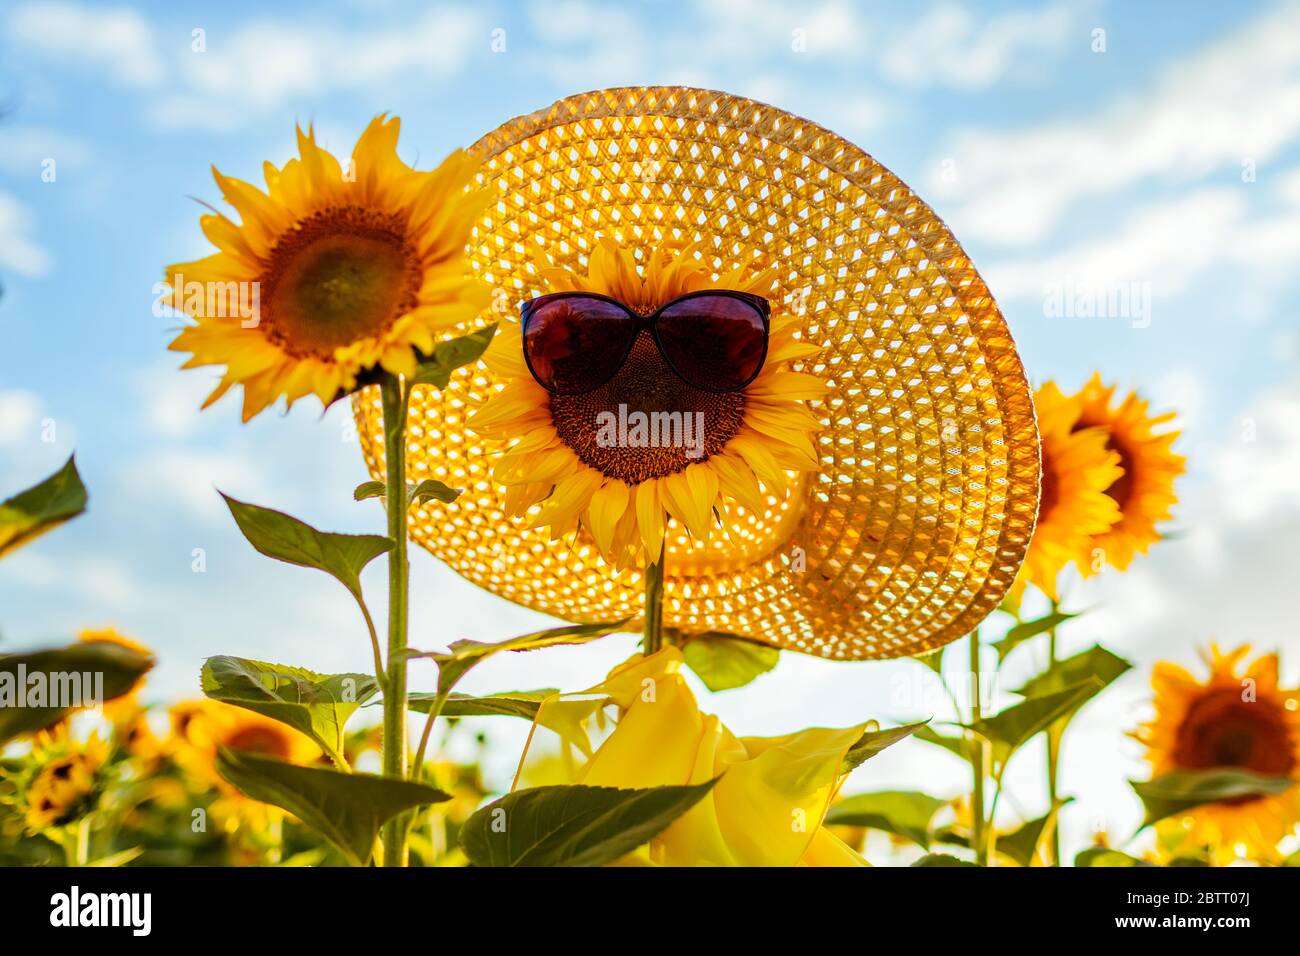 Blooming sunflower in sunglasses scarf and straw hat growing in summer field. Summer vacation Stock Photo